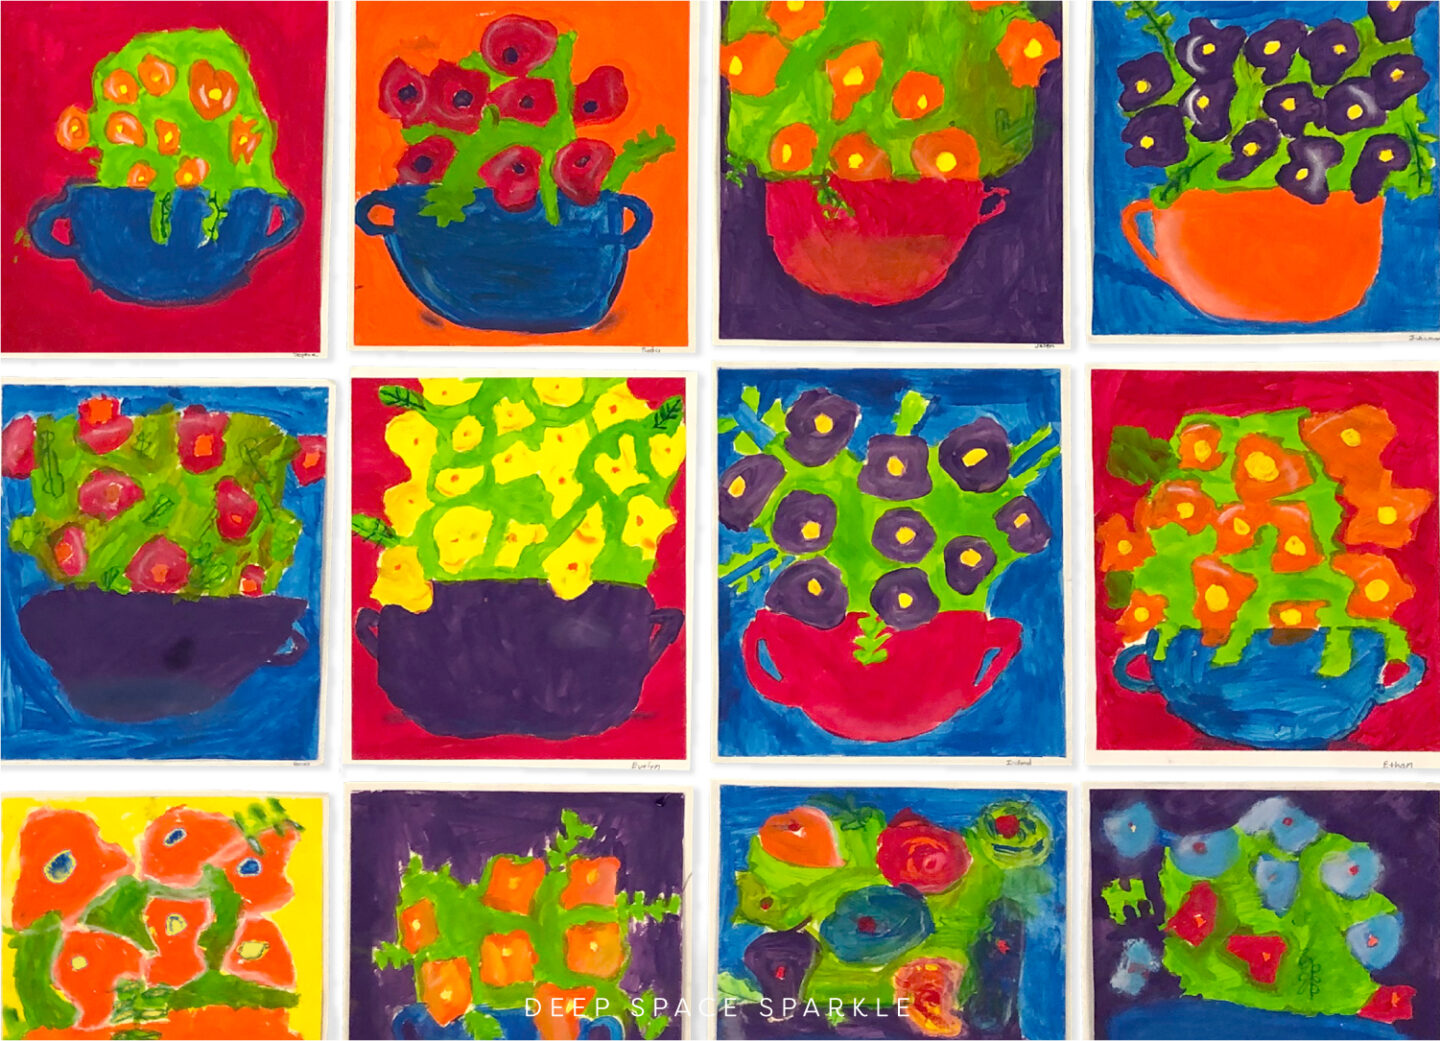 The significance of artist Clementine Hunter in the art room with your classroom of students